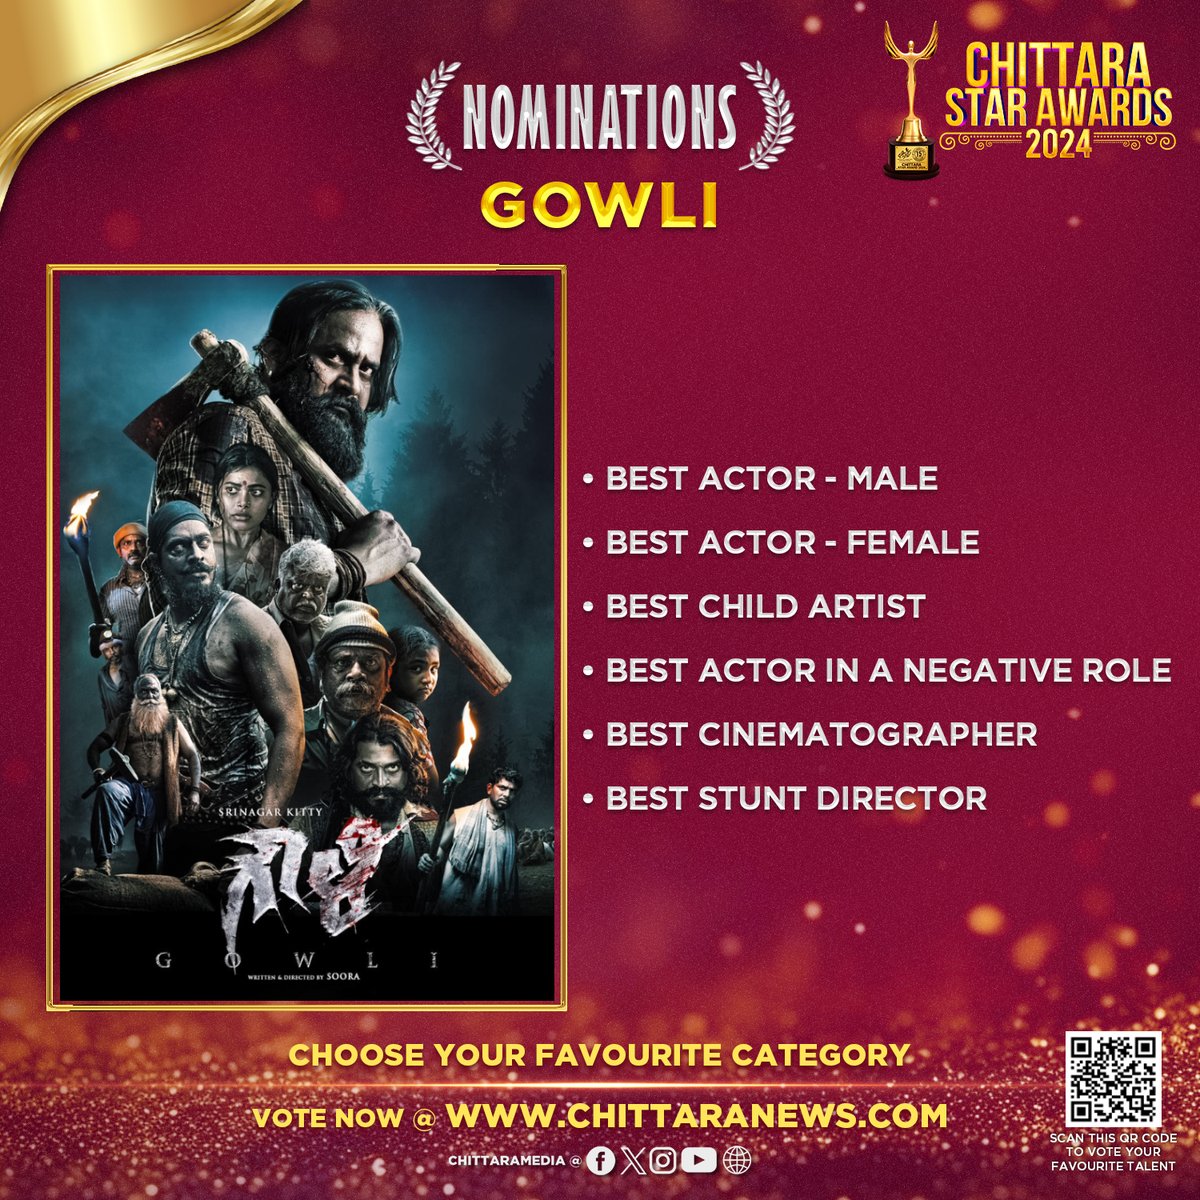 #Gowli 6 Nominations at #ChittaraStarAwards2024 Global Voting is Now Live : awards.chittaranews.com/poll/780/ Vote now and show your love for Team #Gowli #ChittaraStarAwards2024 #CSA2024